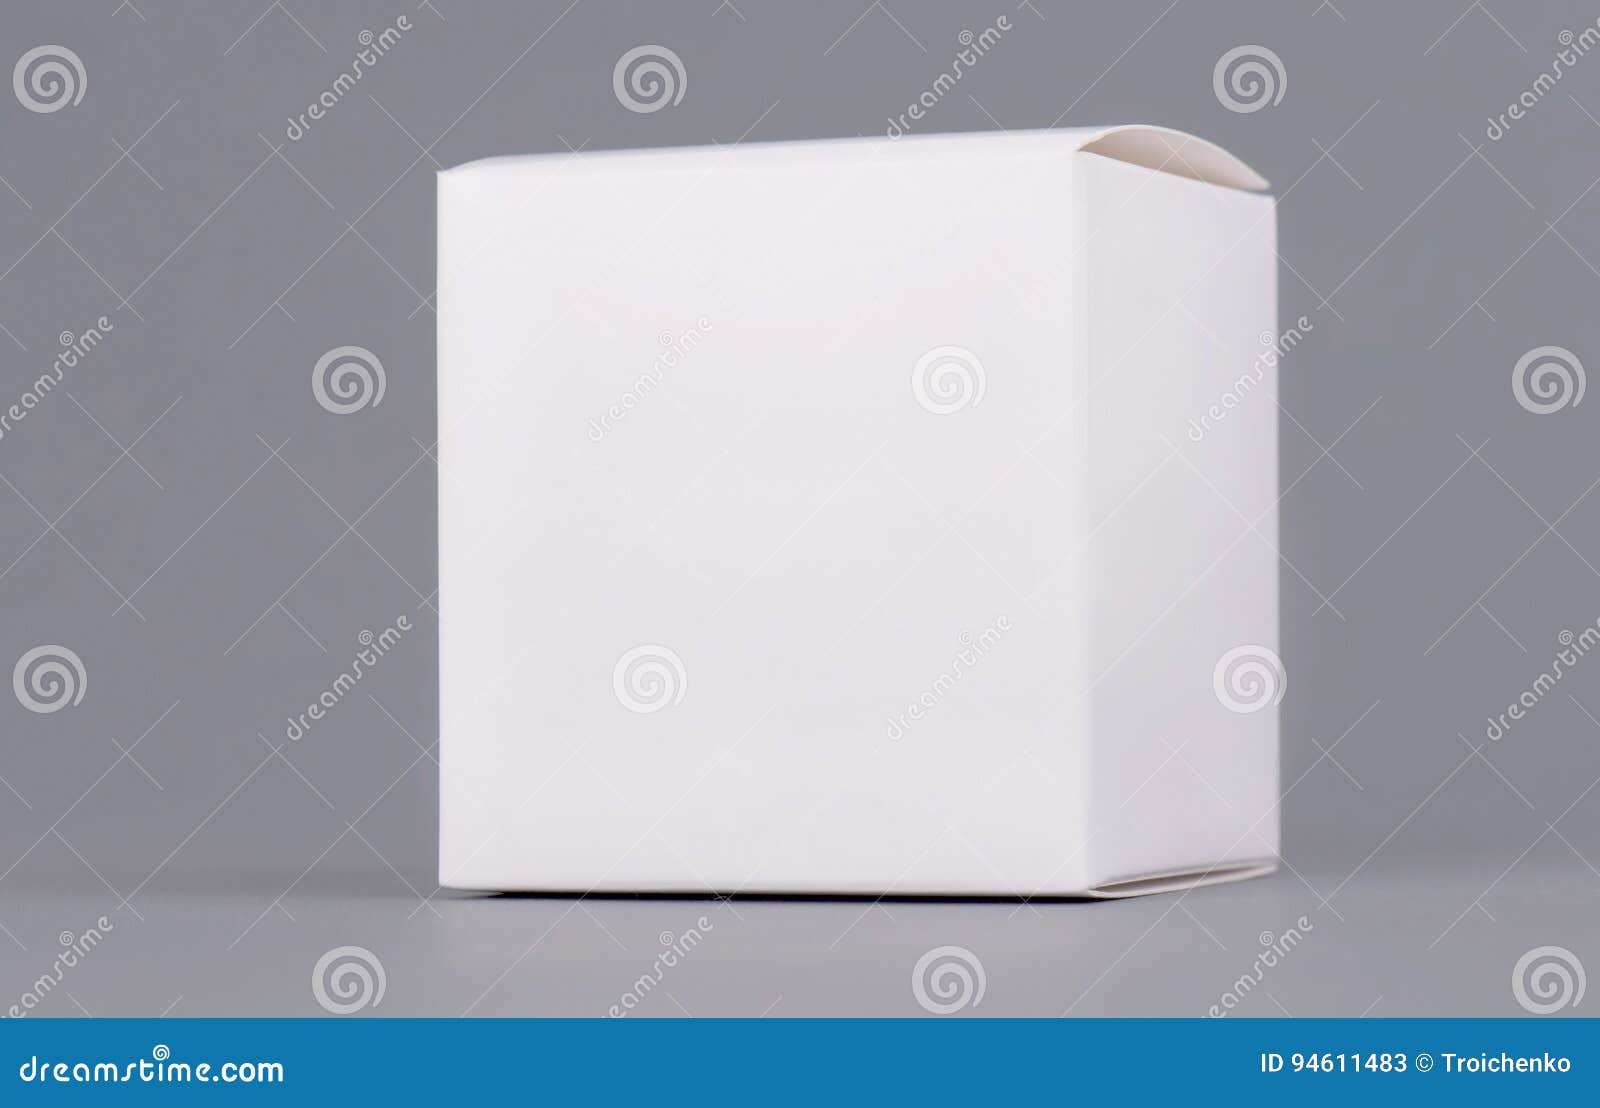 Download Square White Carton Product Box Mock Up, Side View ...